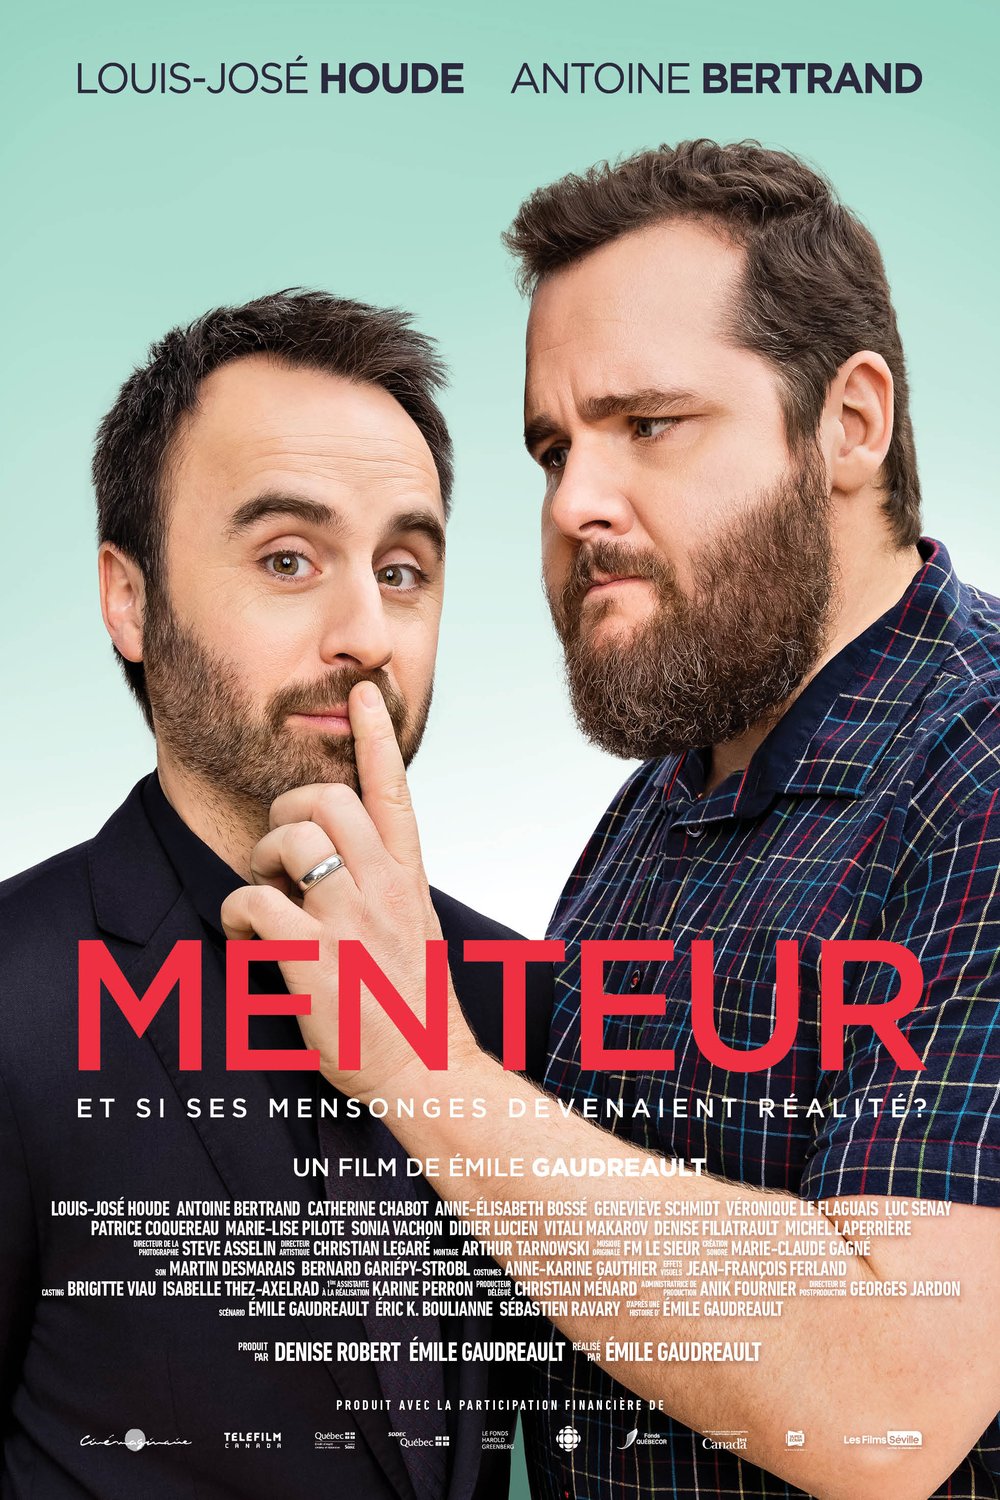 Poster of the movie Menteur